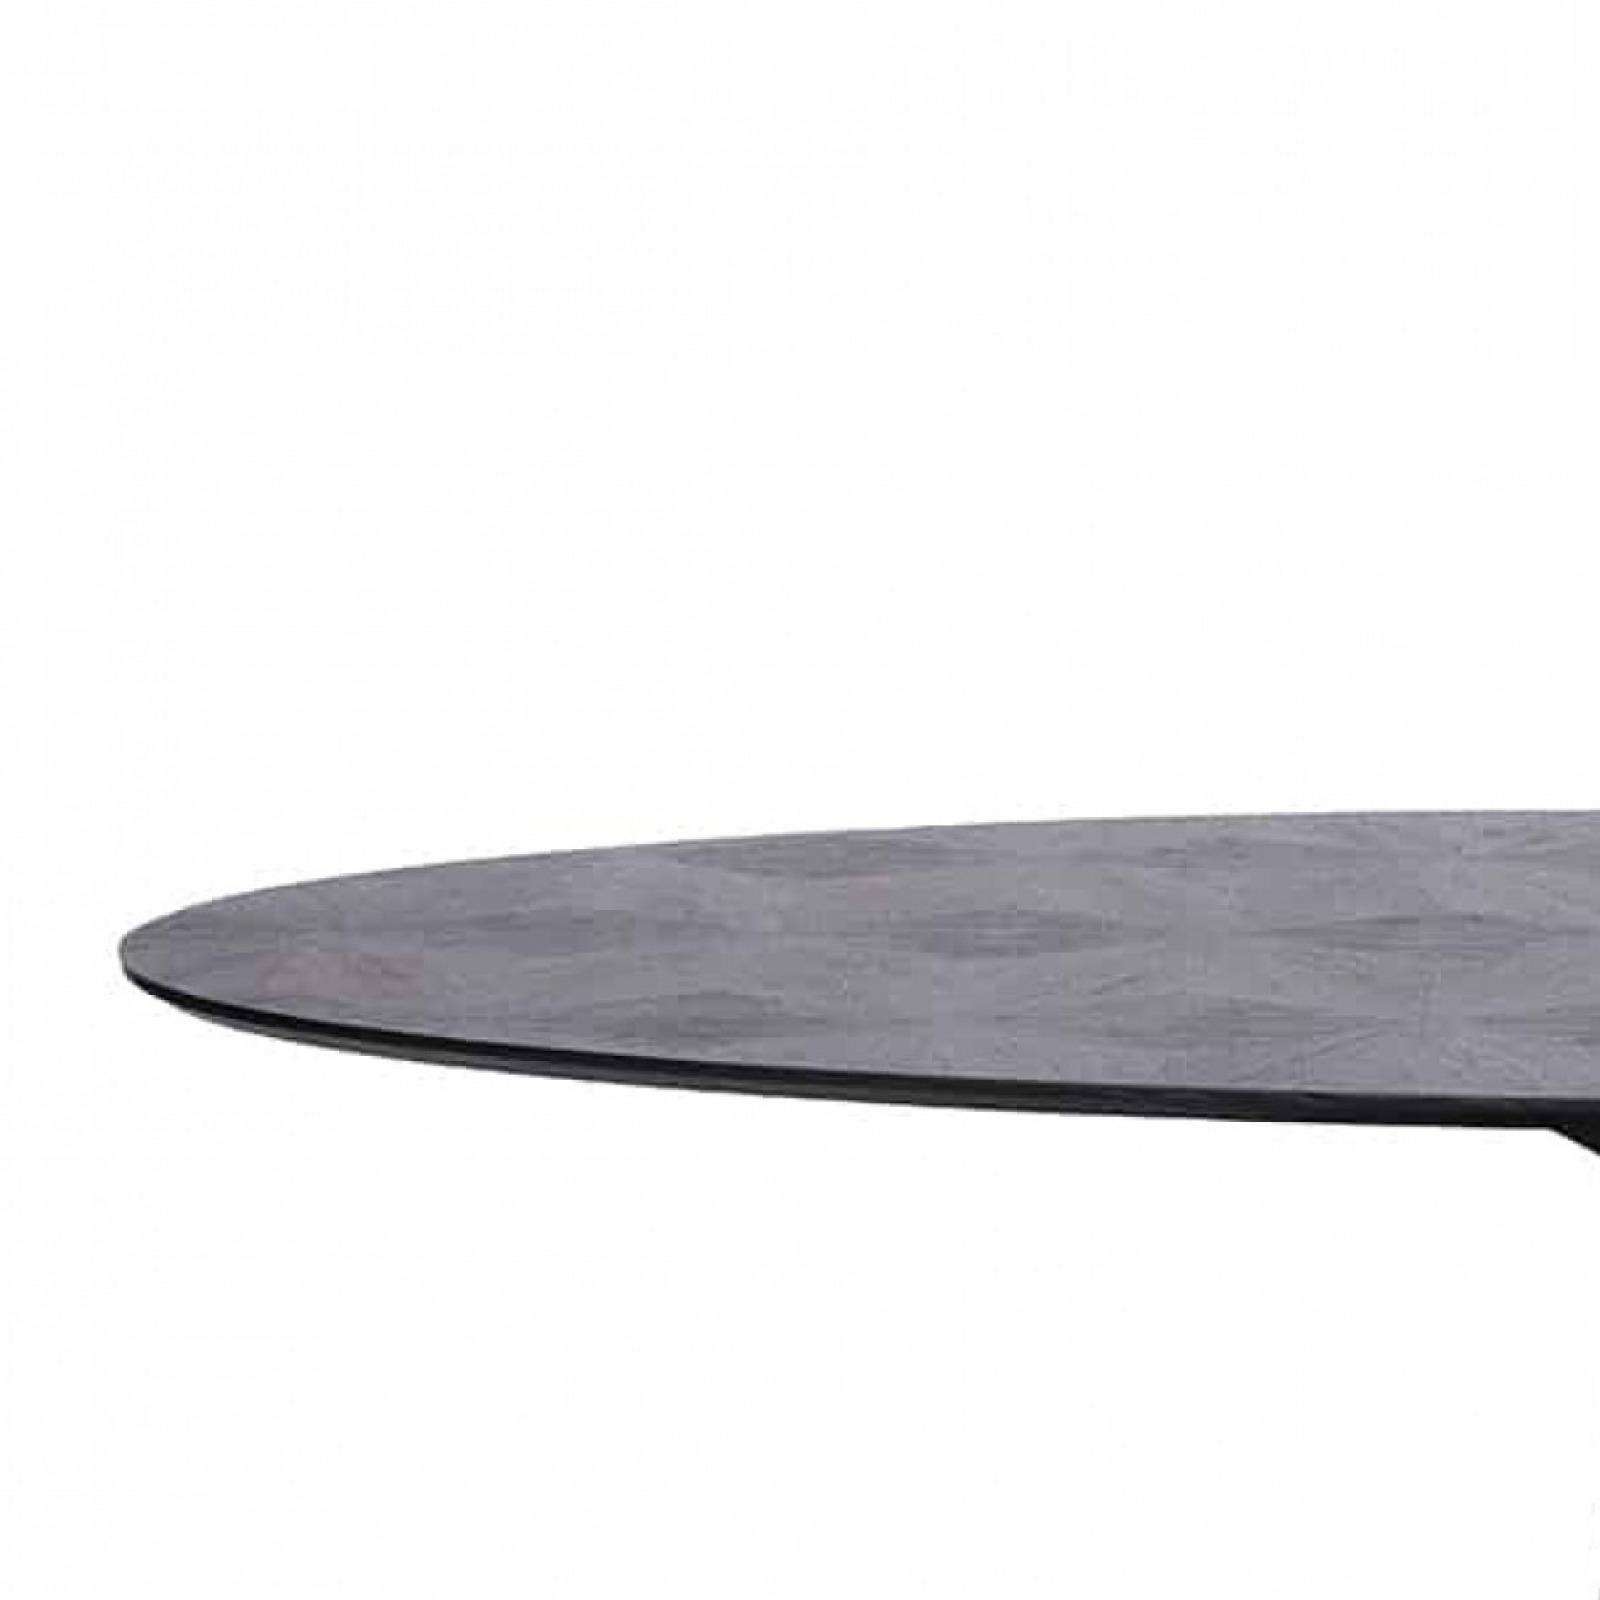 Blax oval dining table